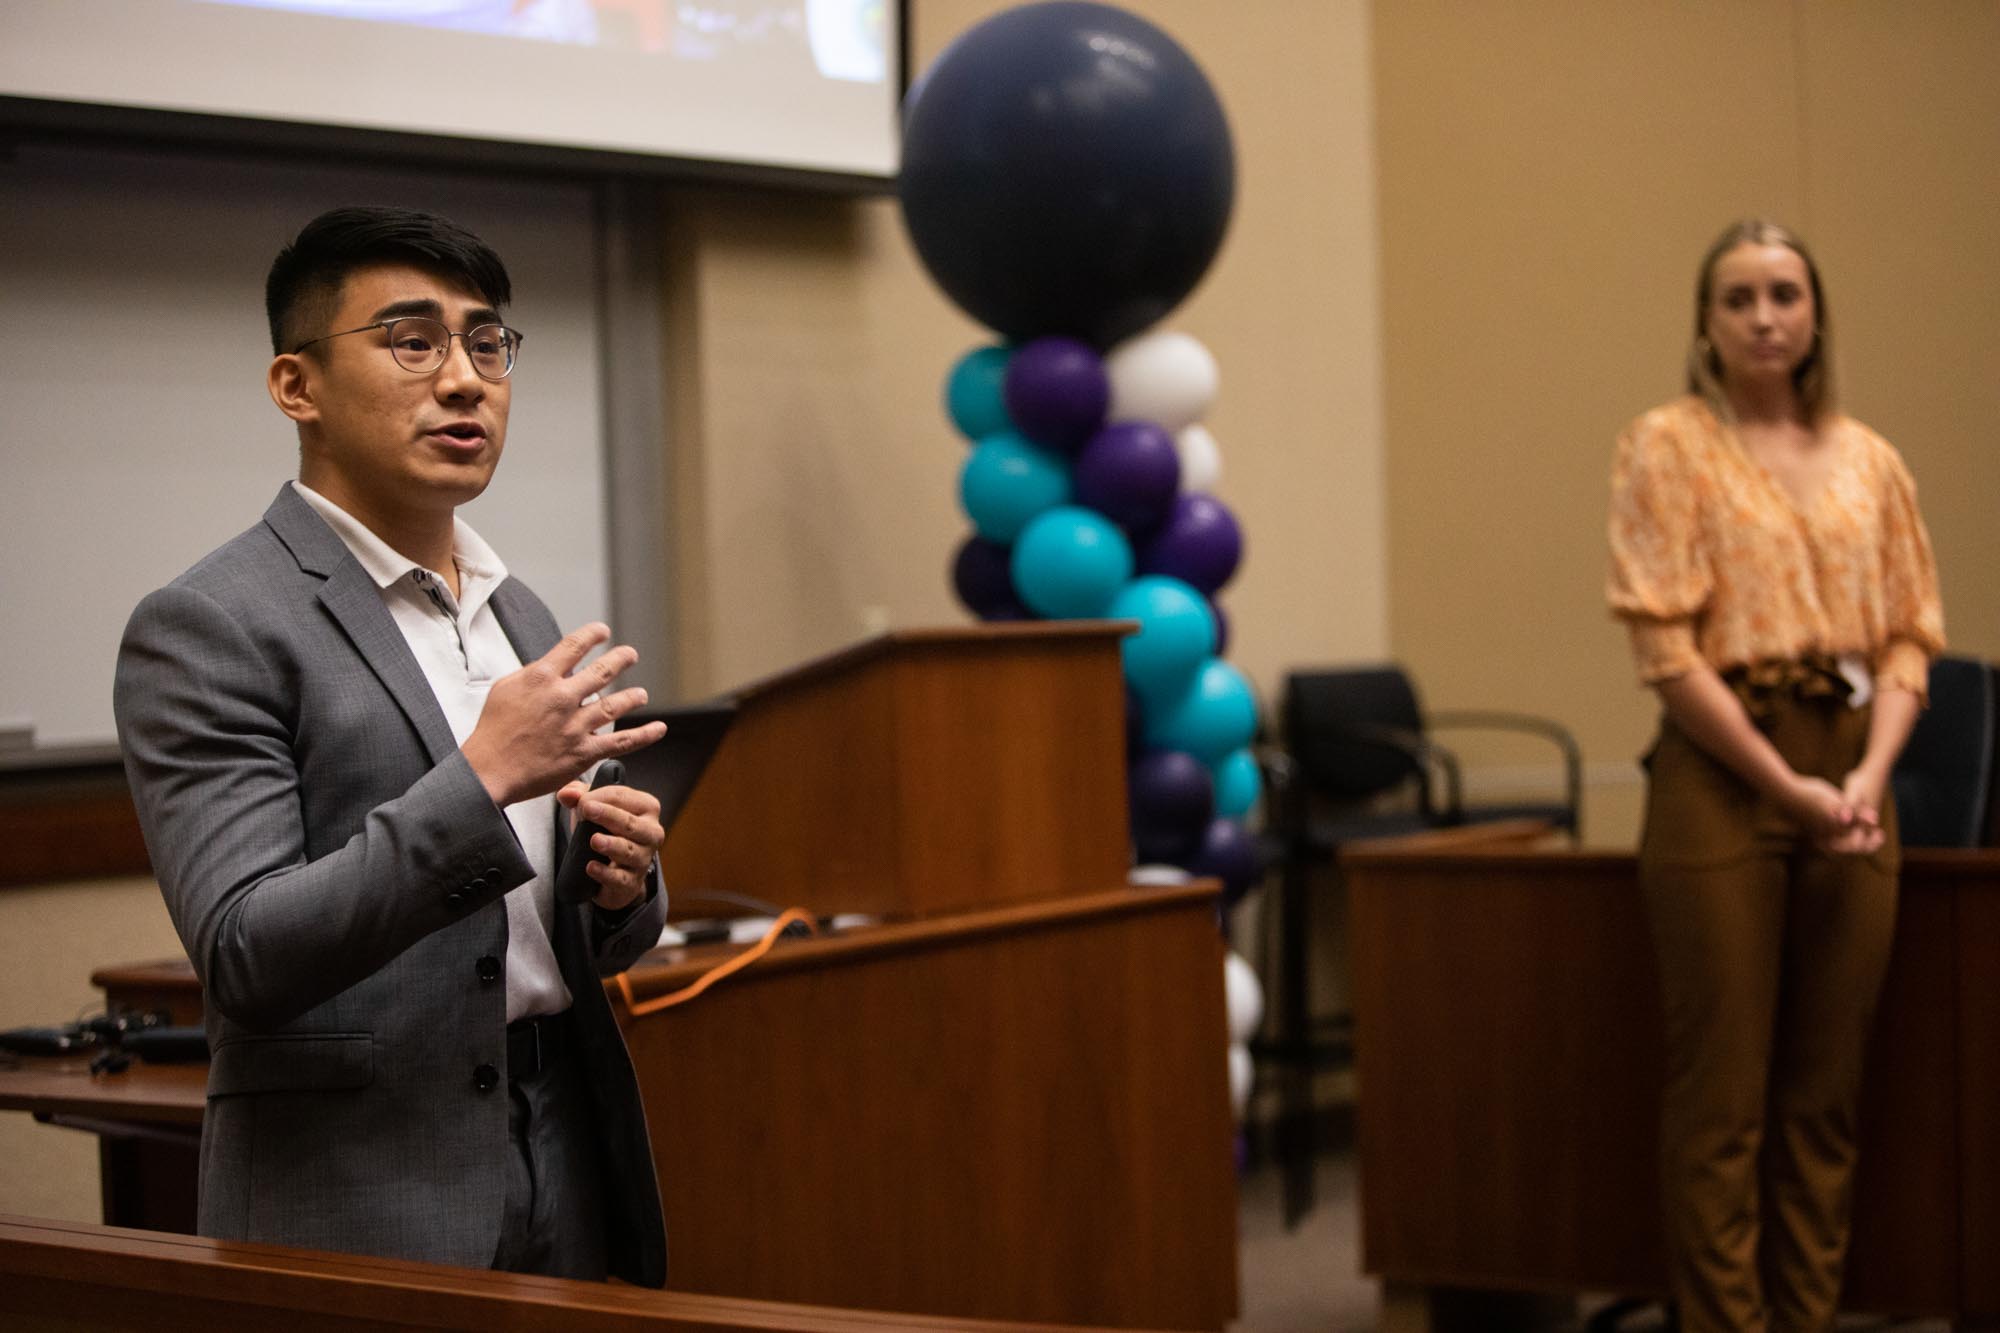 Hao Taing and Jamie Tjornehoj of Local4Local pitch during the Fowler Global Social Innovation Challenge in Schulze Hall on April 22, 2022, in Minneapolis.